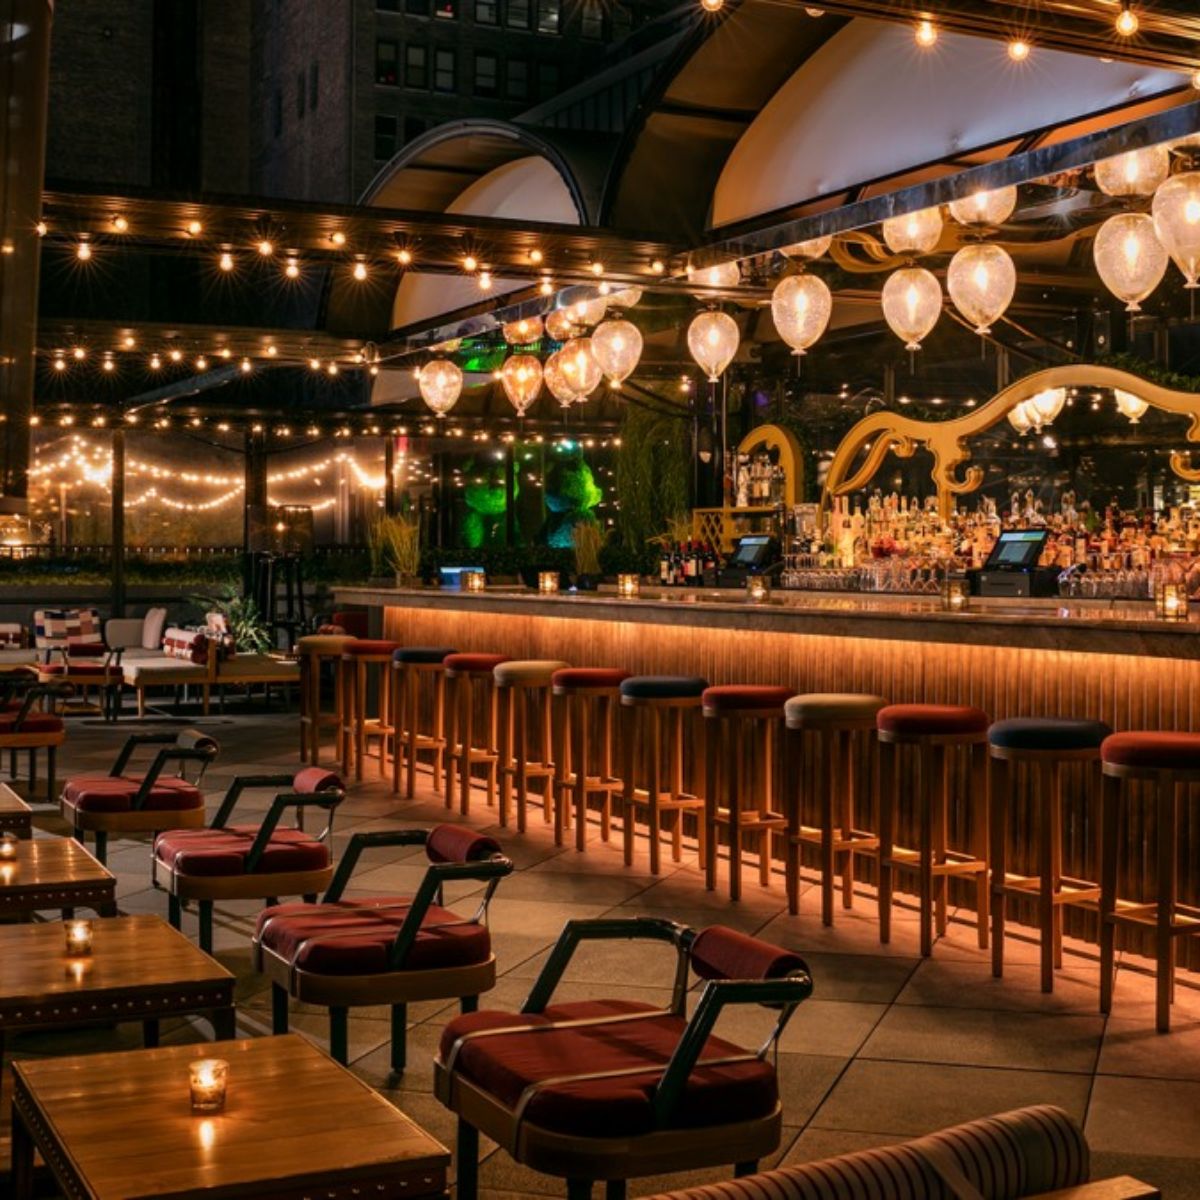 Magic Hour Rooftop Bar & Lounge Restaurant - New York, NY | OpenTable